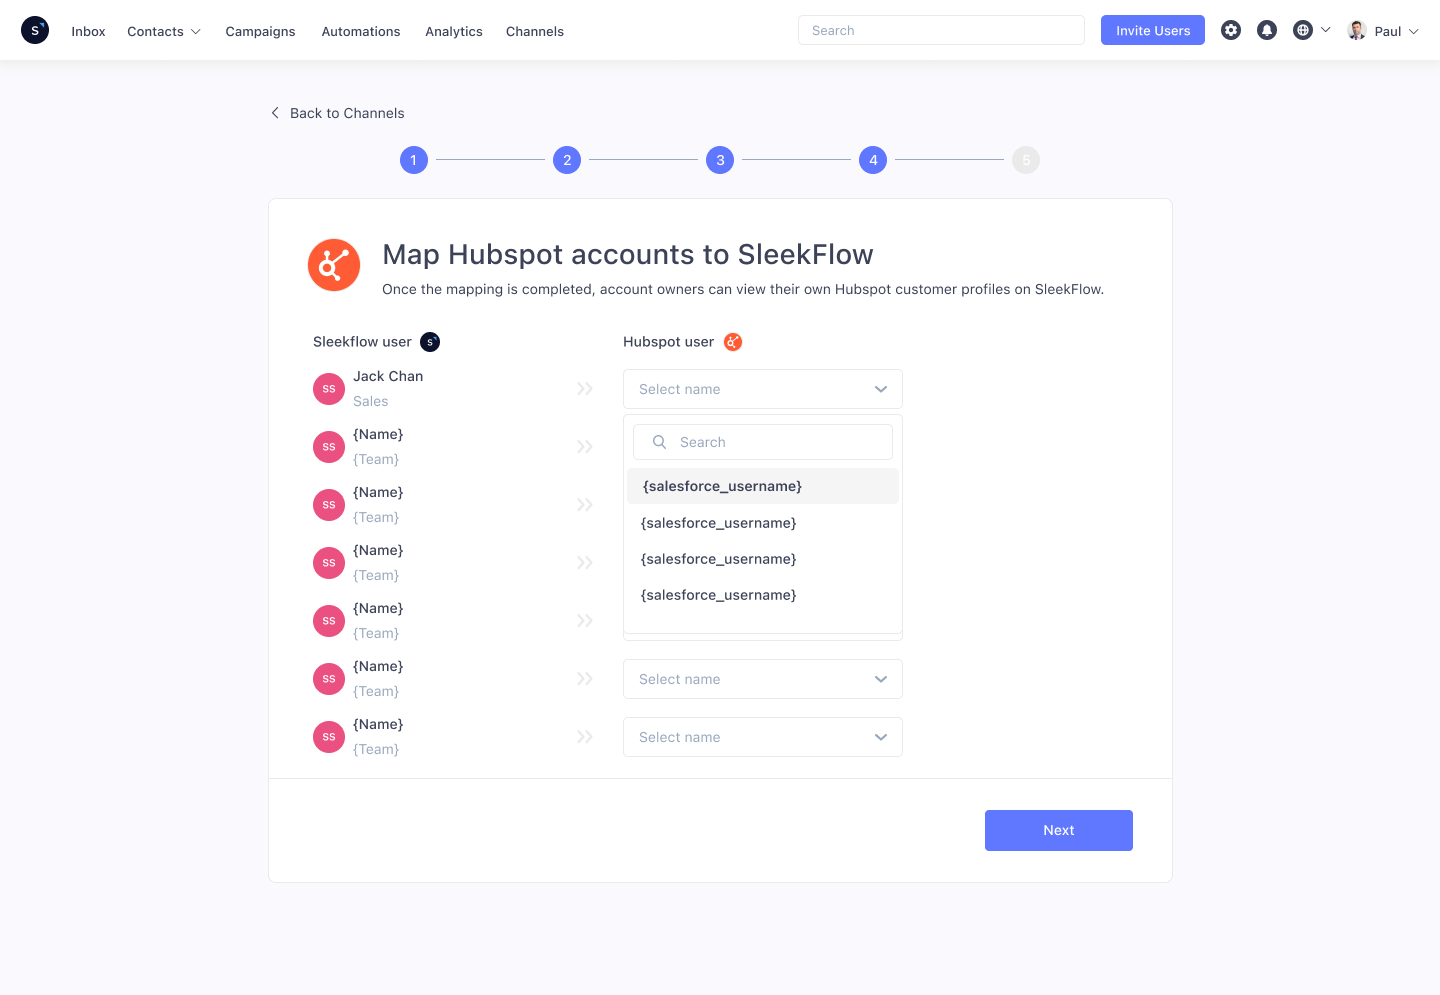 Mapping HubSpot account owners to SleekFlow